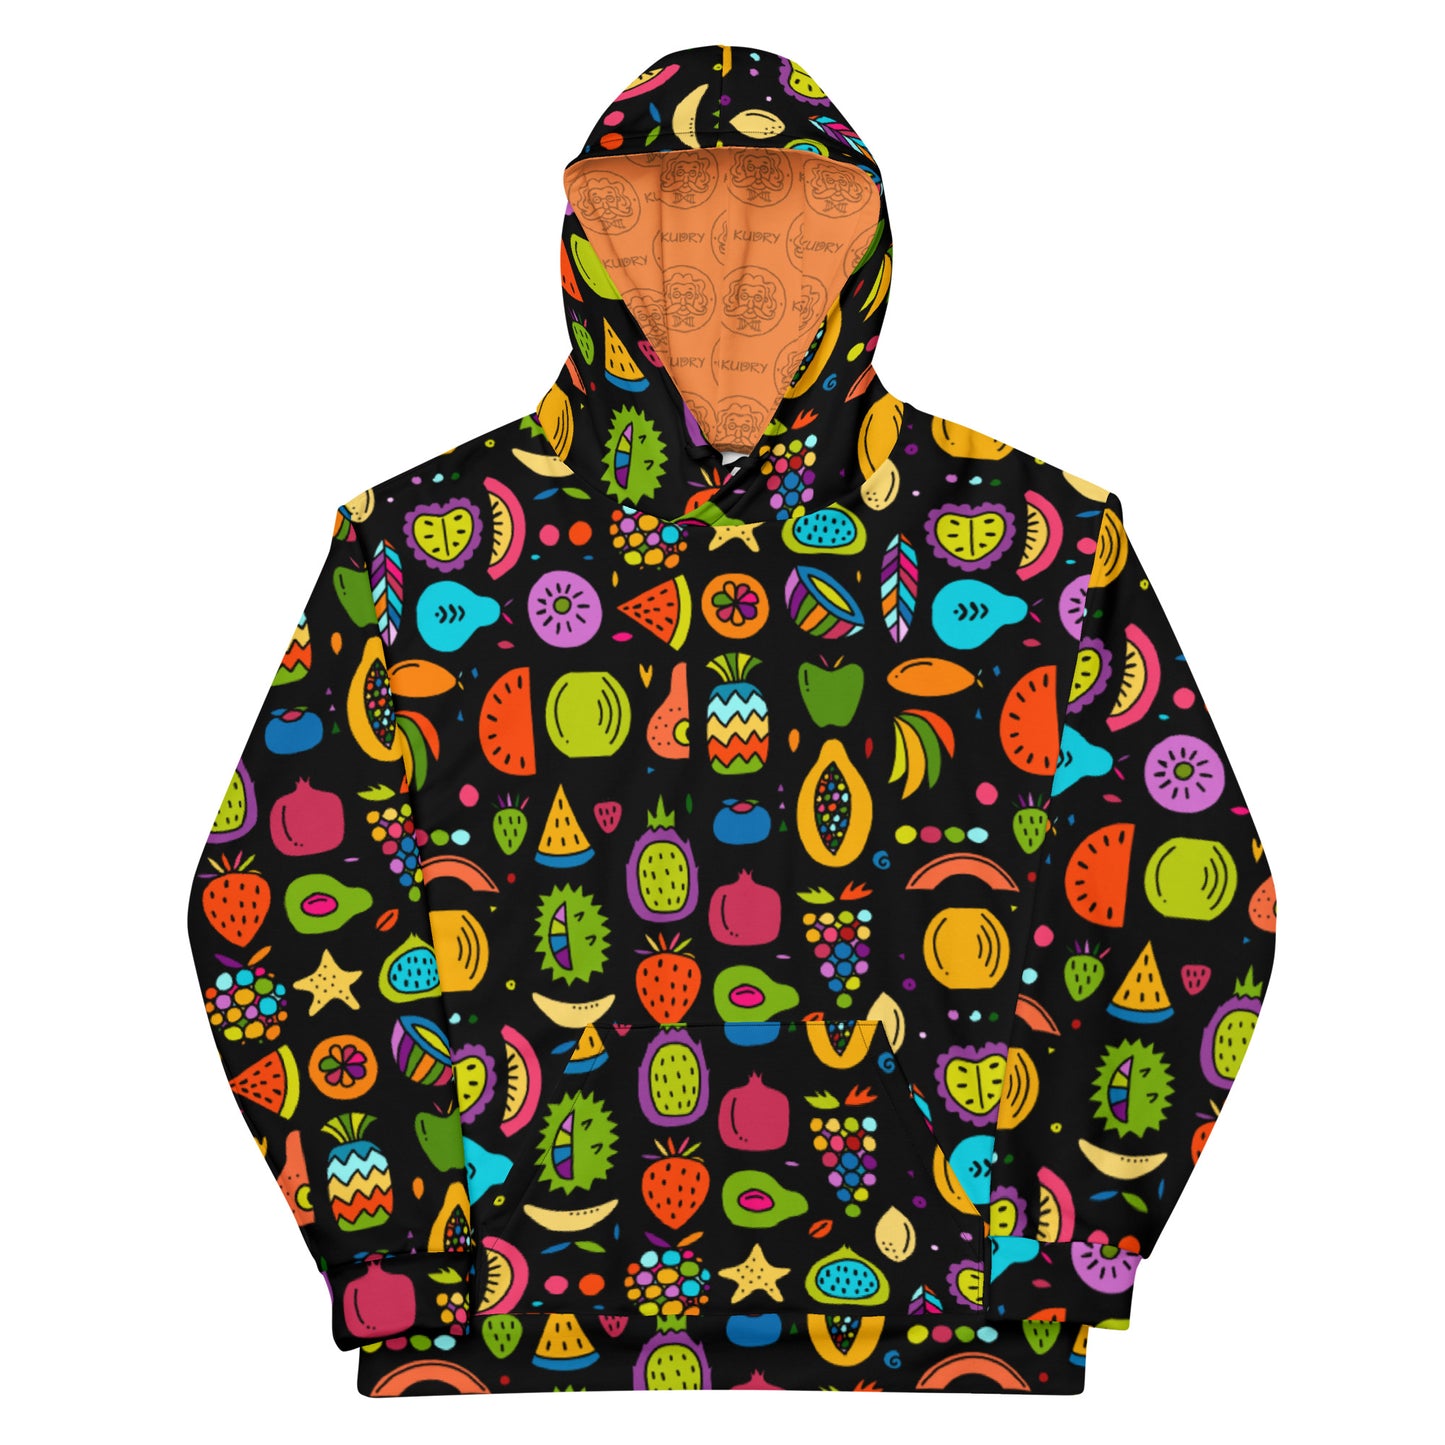 Pomologist Unisex Hoodie black with colorful fruits